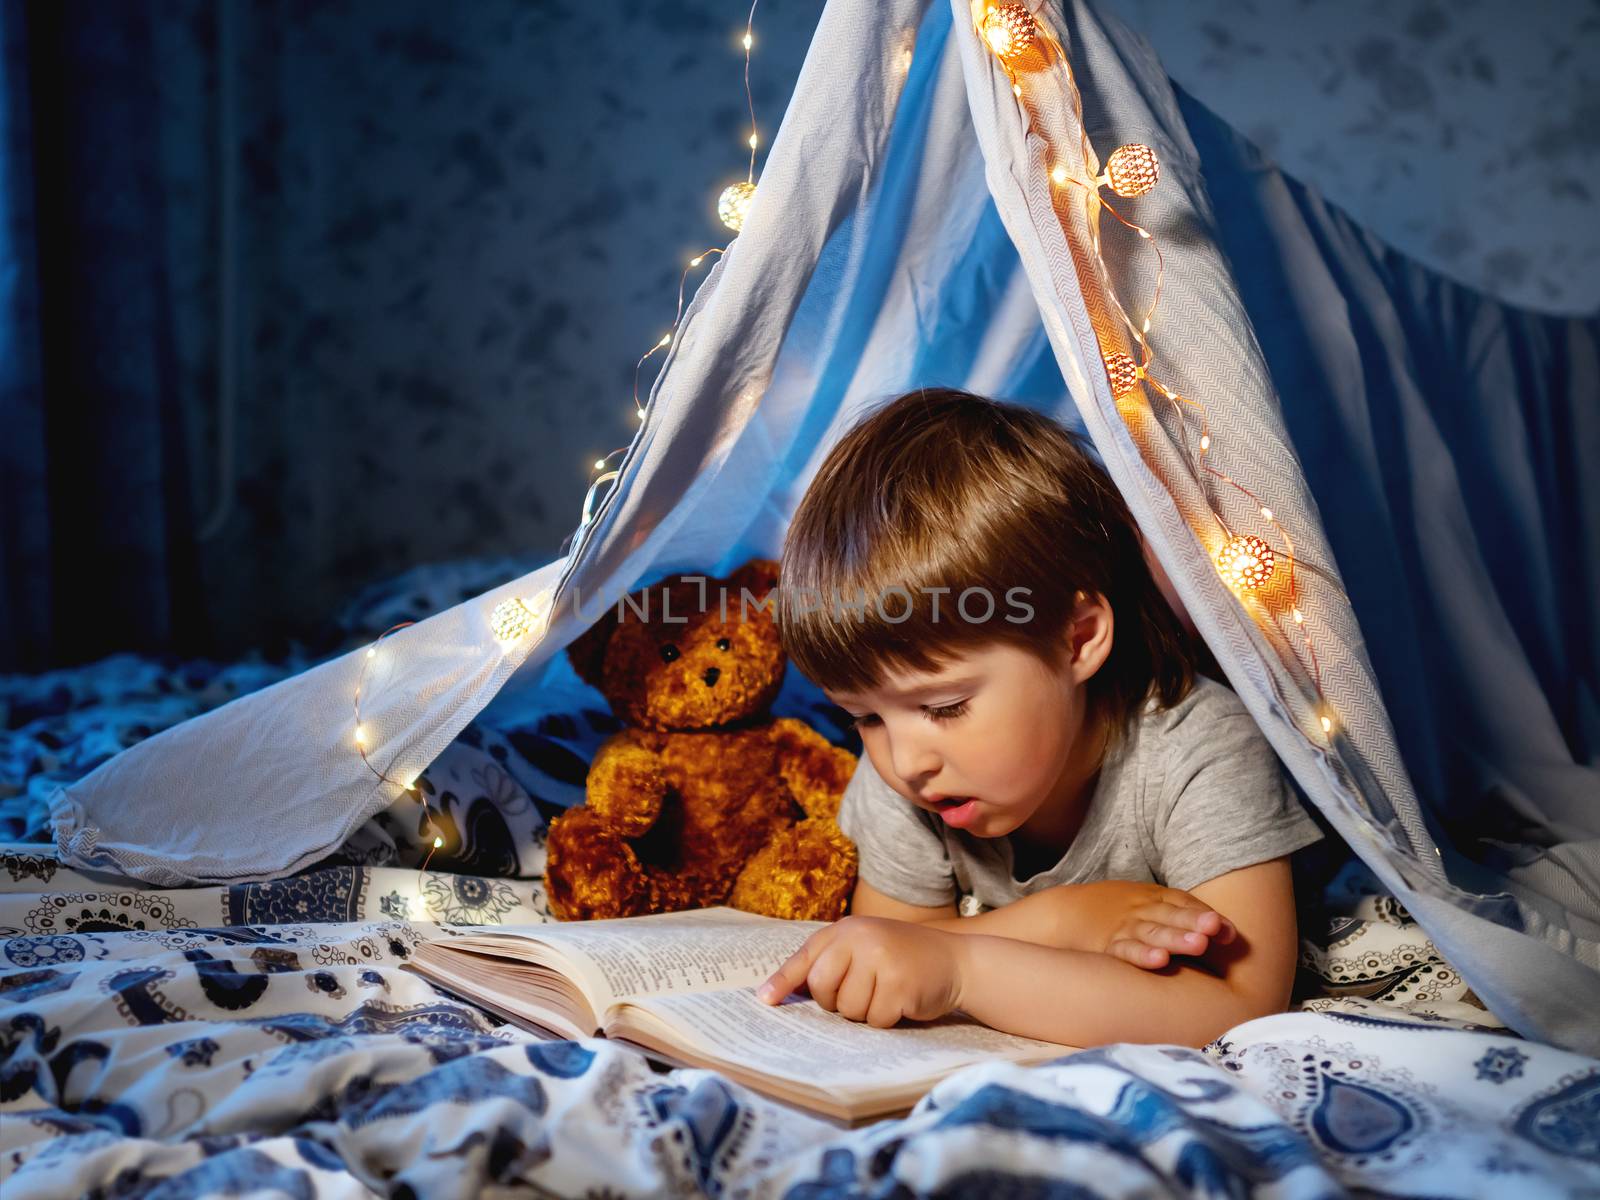 Little boy reads book. Toddler plays in tent made of linen sheet by aksenovko